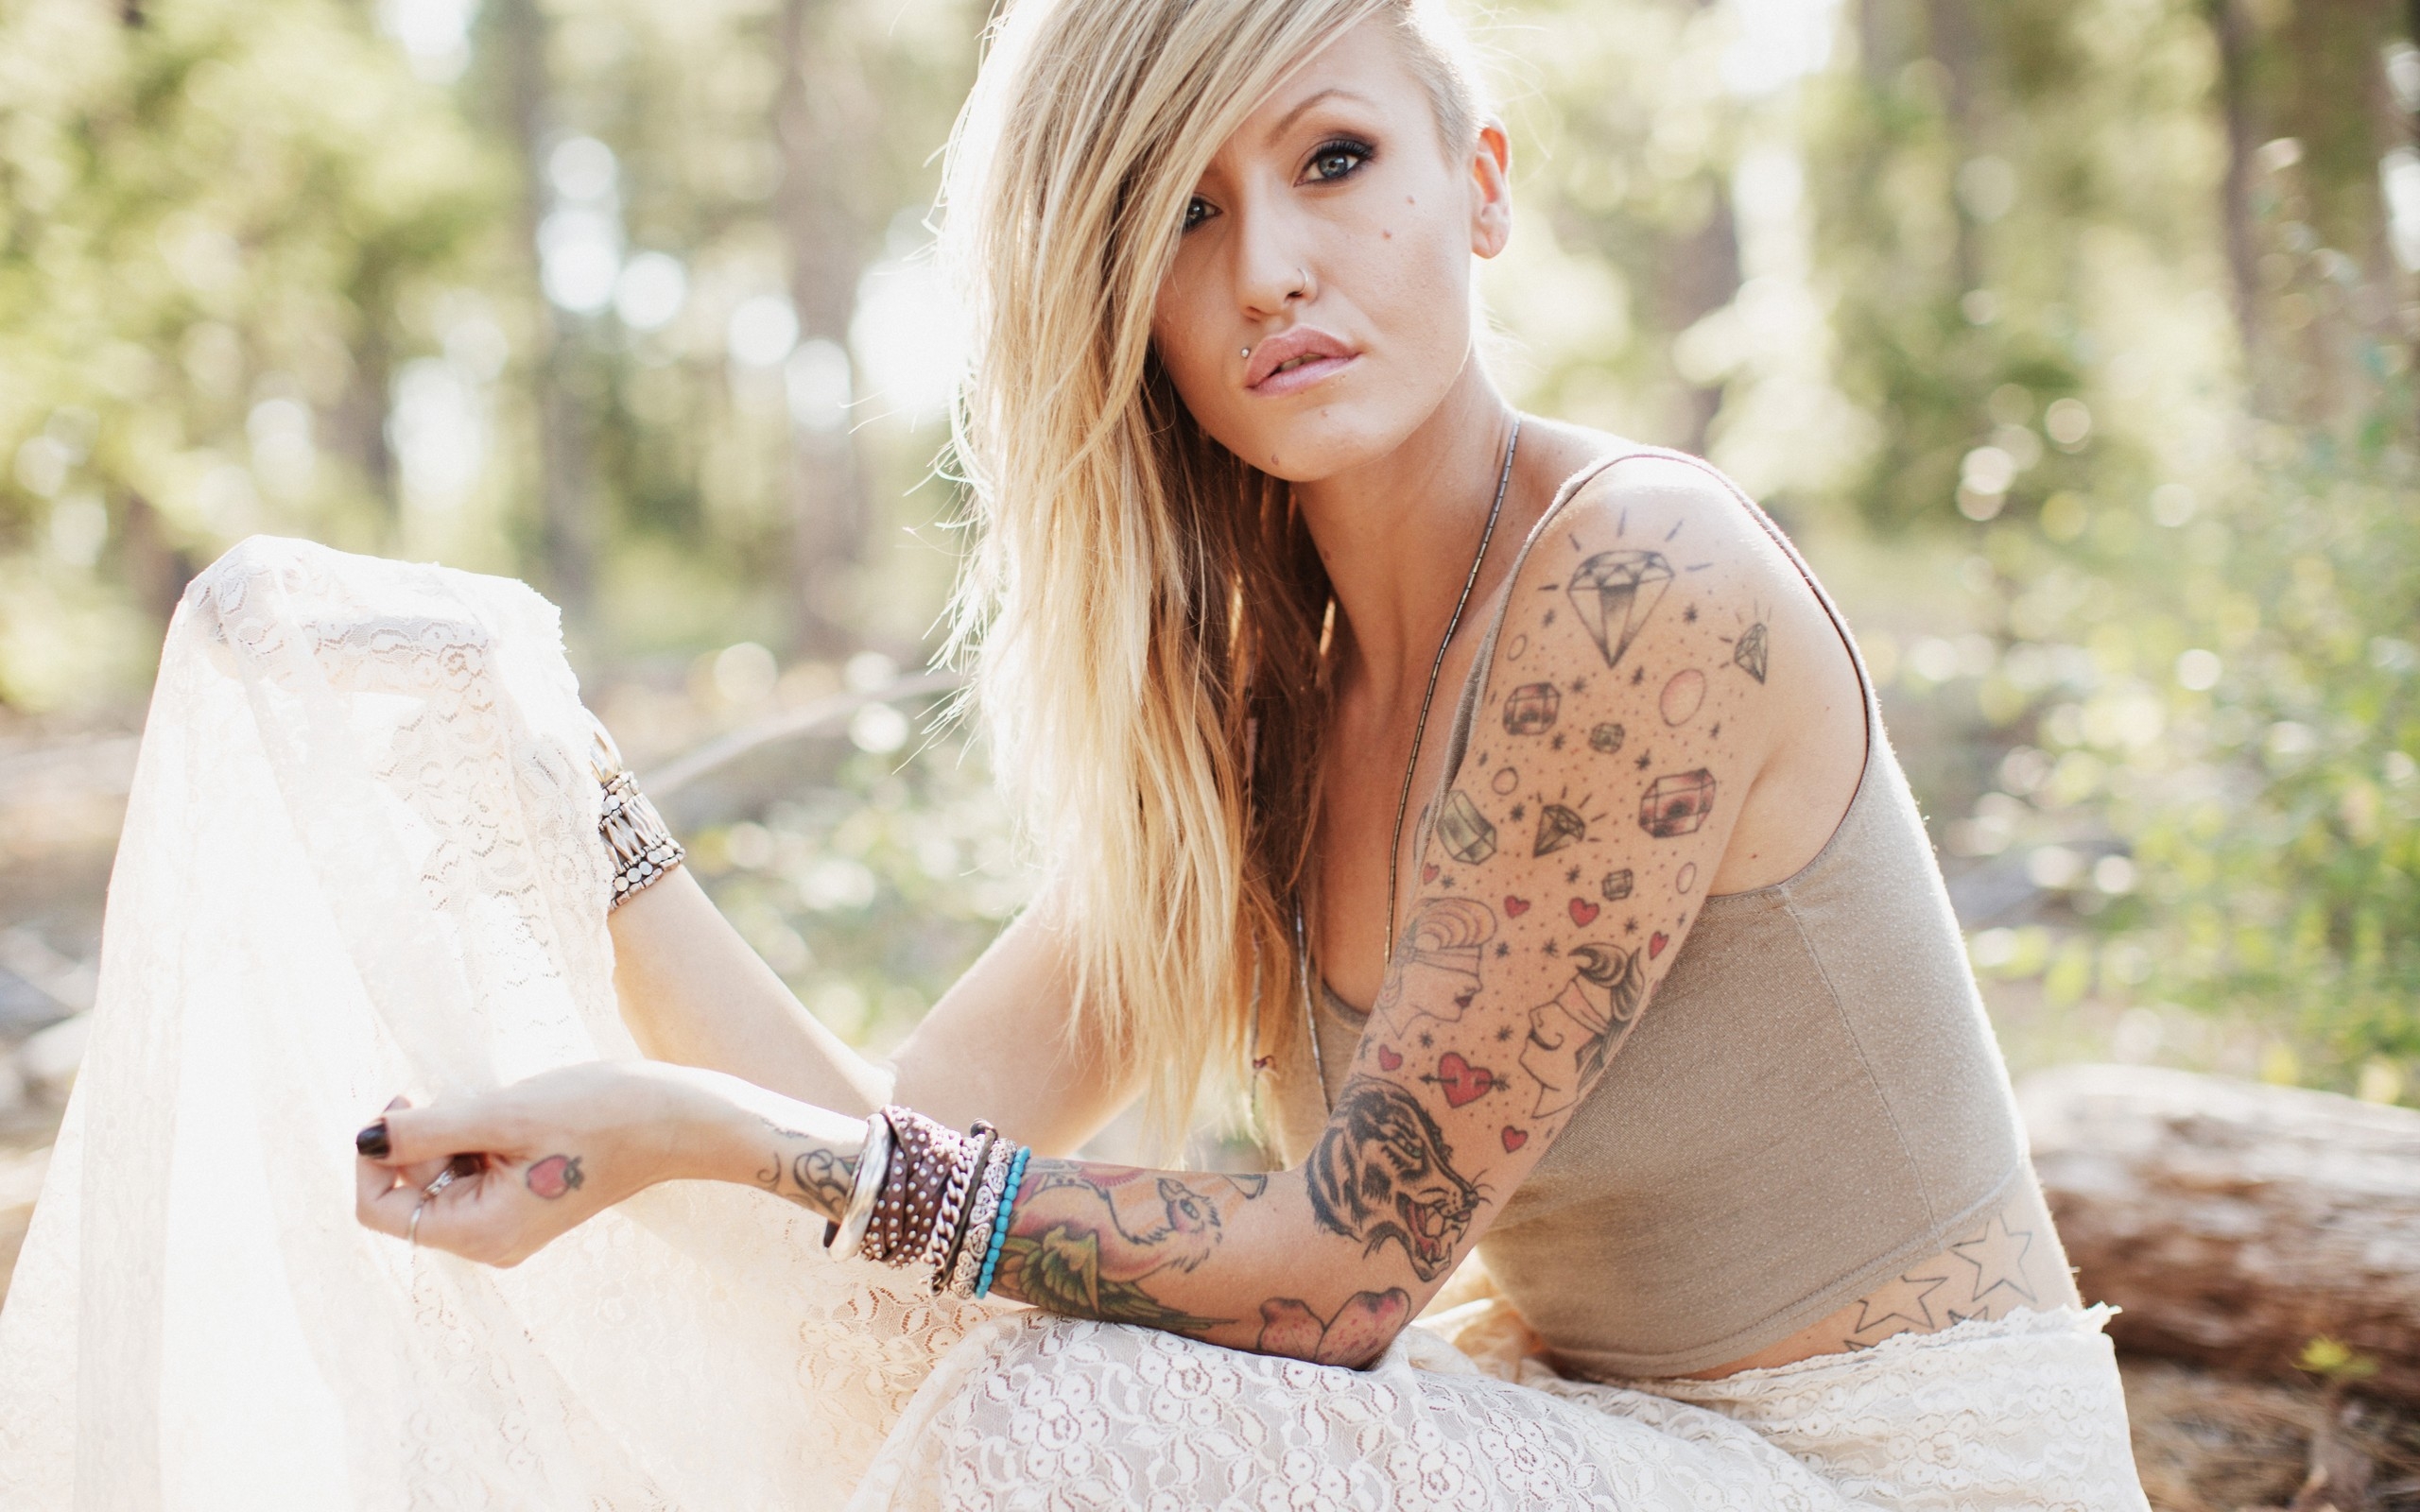 Free photo Blonde girl with a tattoo on her arm.